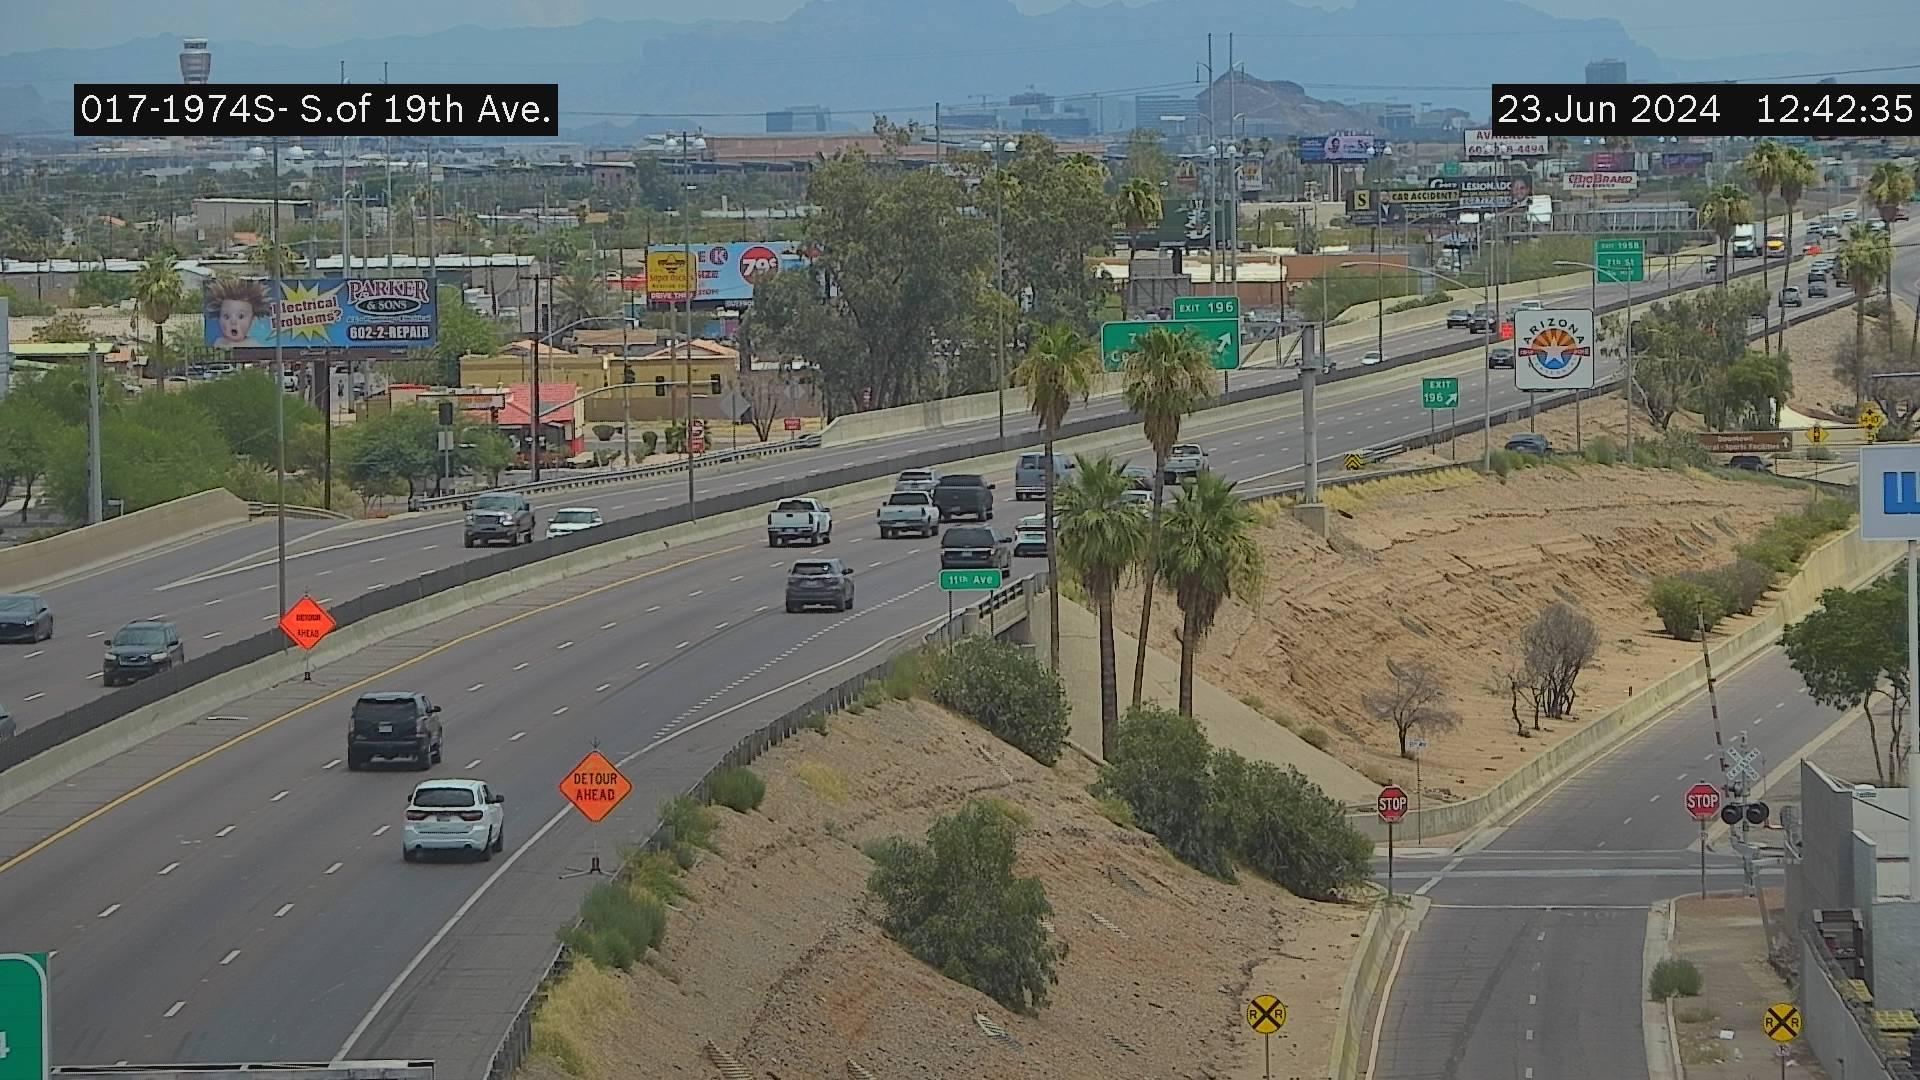 Traffic Cam Phoenix › South: I-17 SB 197.42 @S of 19th Ave Player